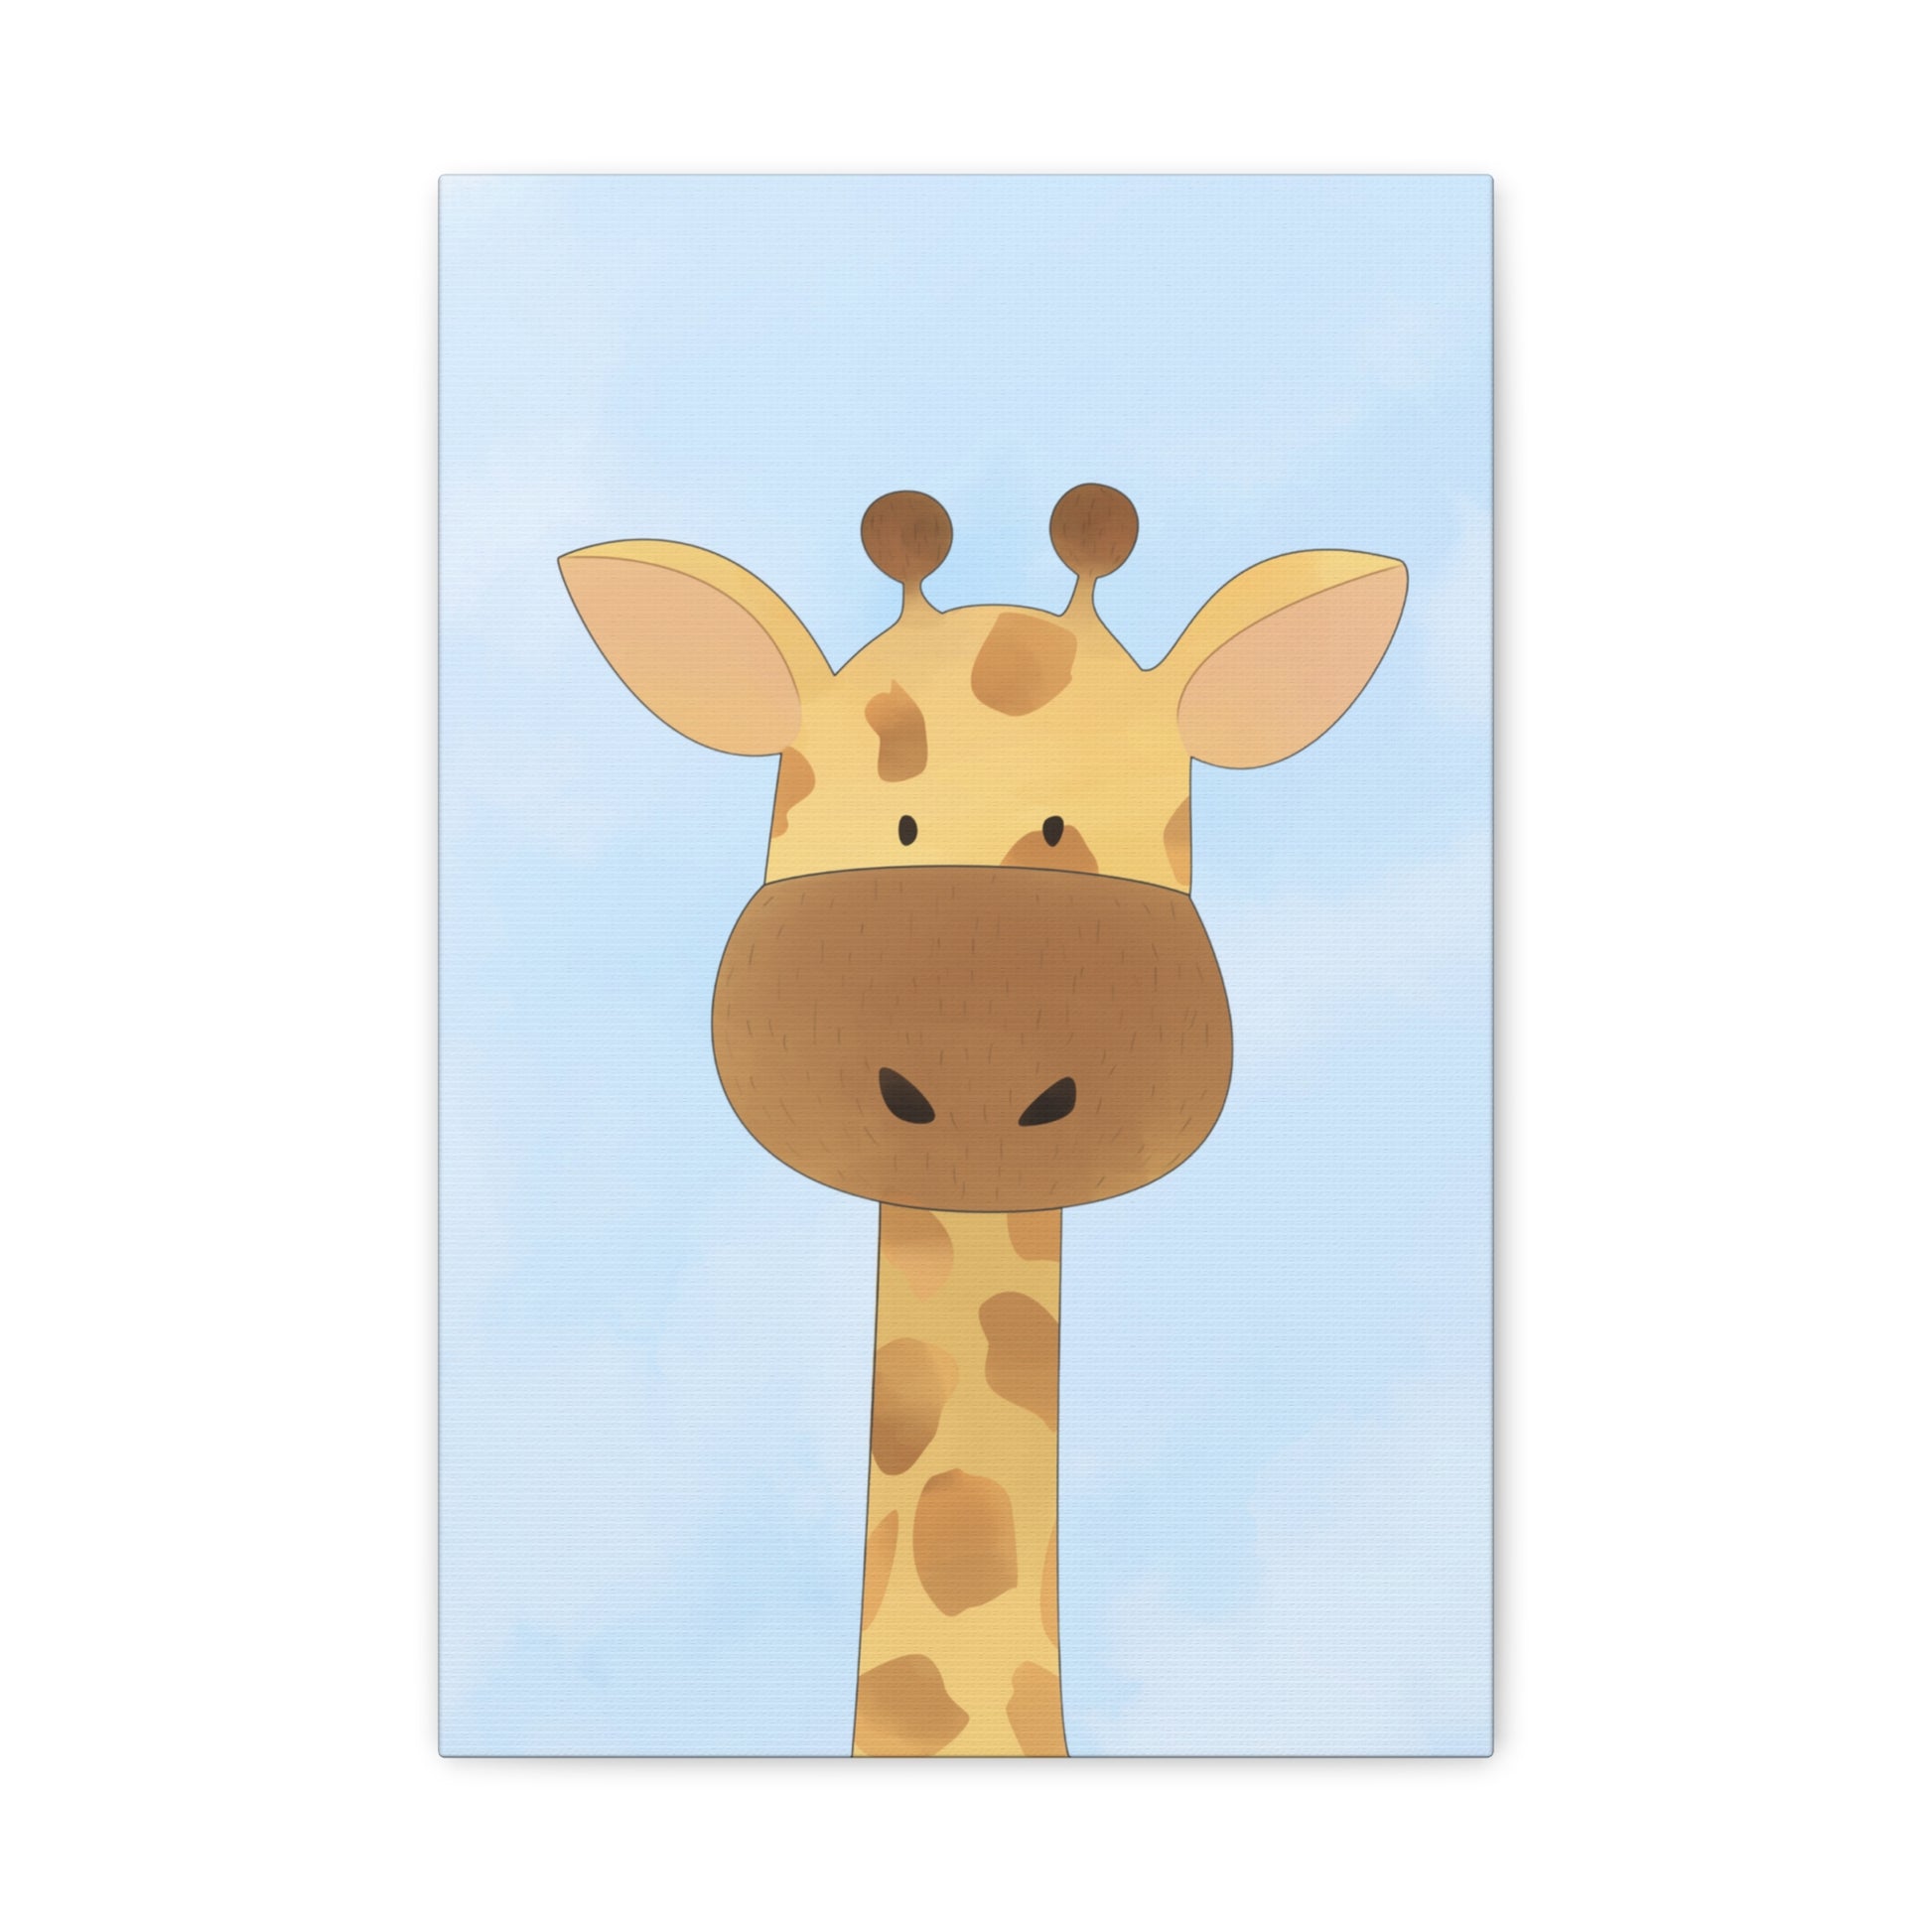 "Child's Giraffe" Wall Art - Weave Got Gifts - Unique Gifts You Won’t Find Anywhere Else!